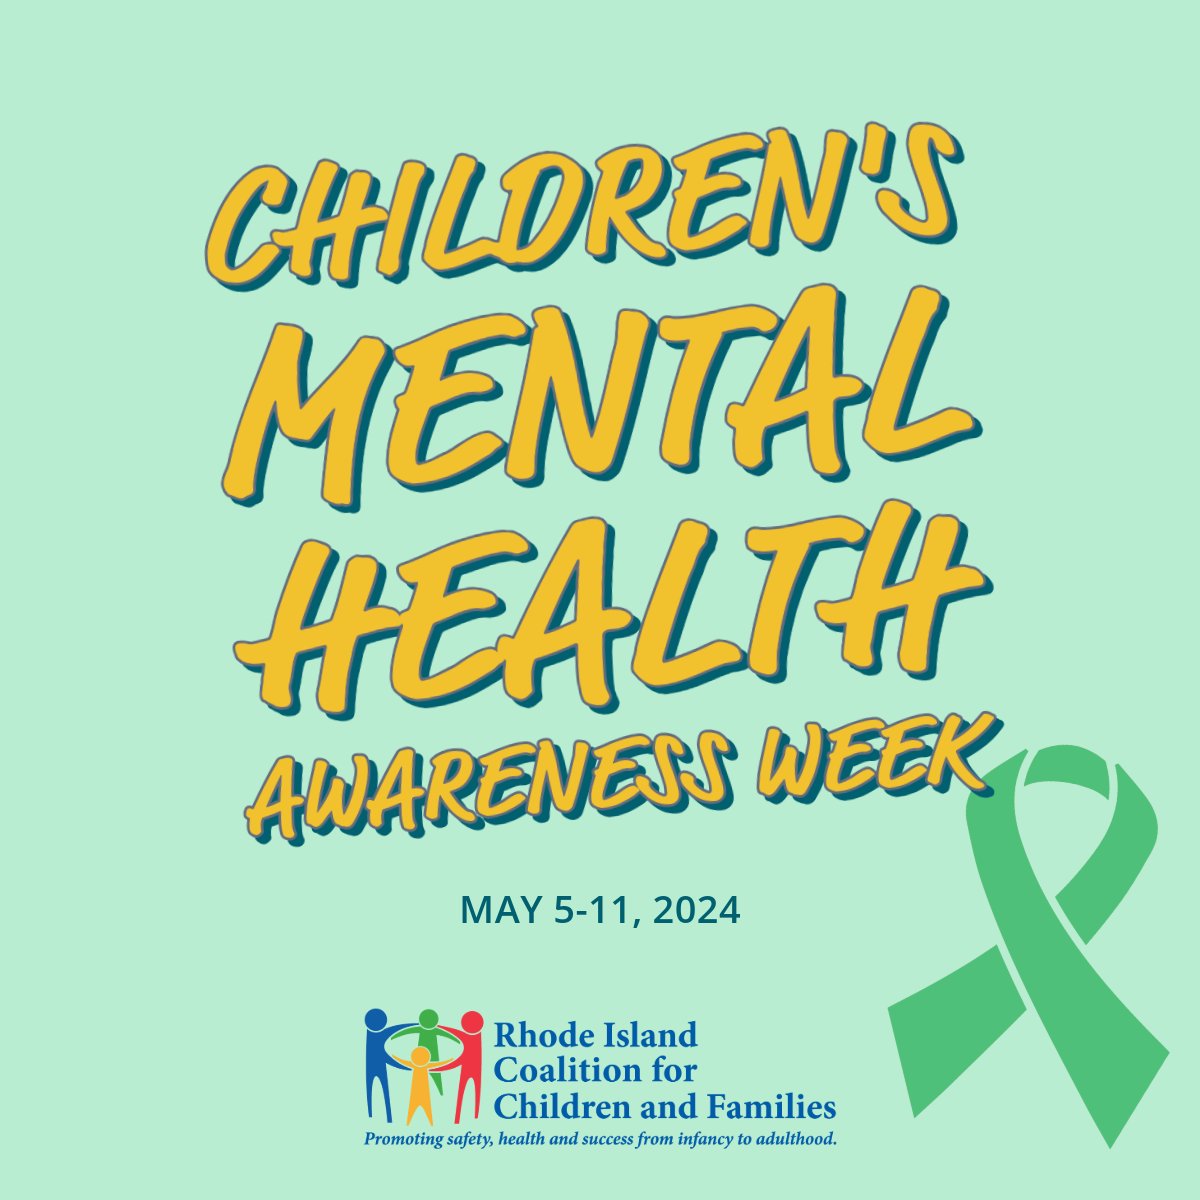 It's Children's Mental Health Awareness Week! #RICCF recognizes the incredible programs and unparalleled dedication of the practitioners in our coalition who tirelessly support children and families in Rhode Island.